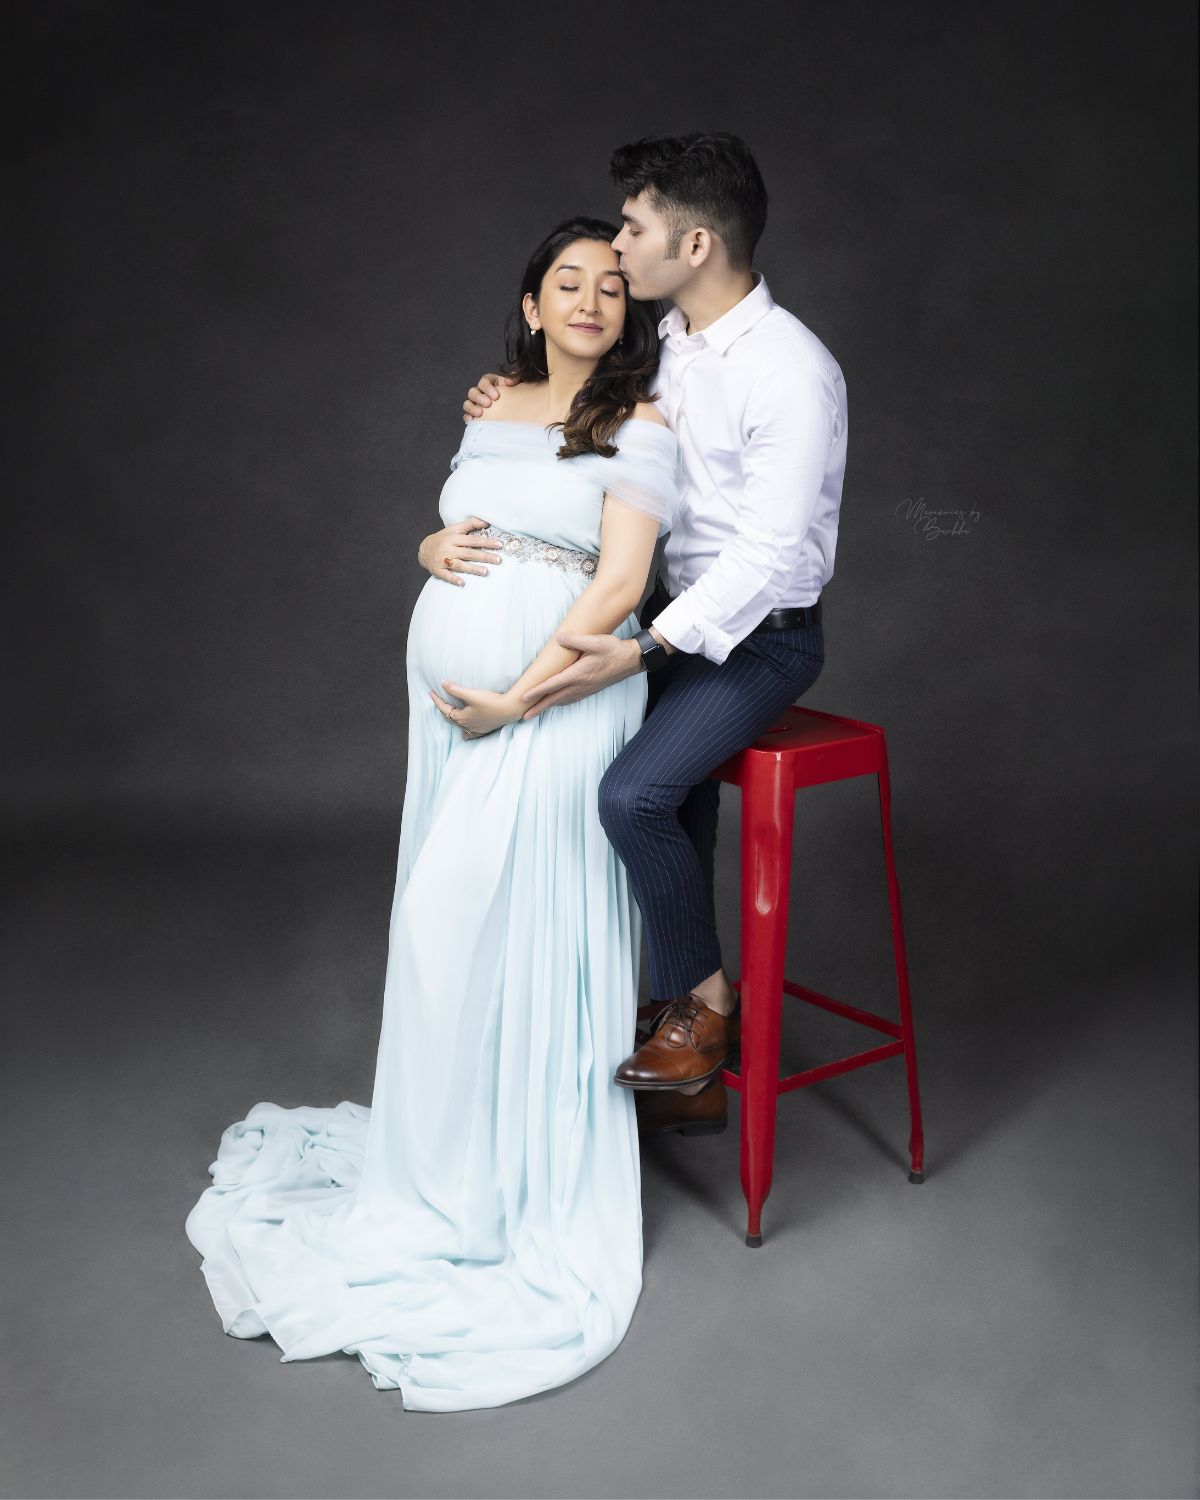 Cozy and Intimate Indoor Maternity Photoshoot Ideas